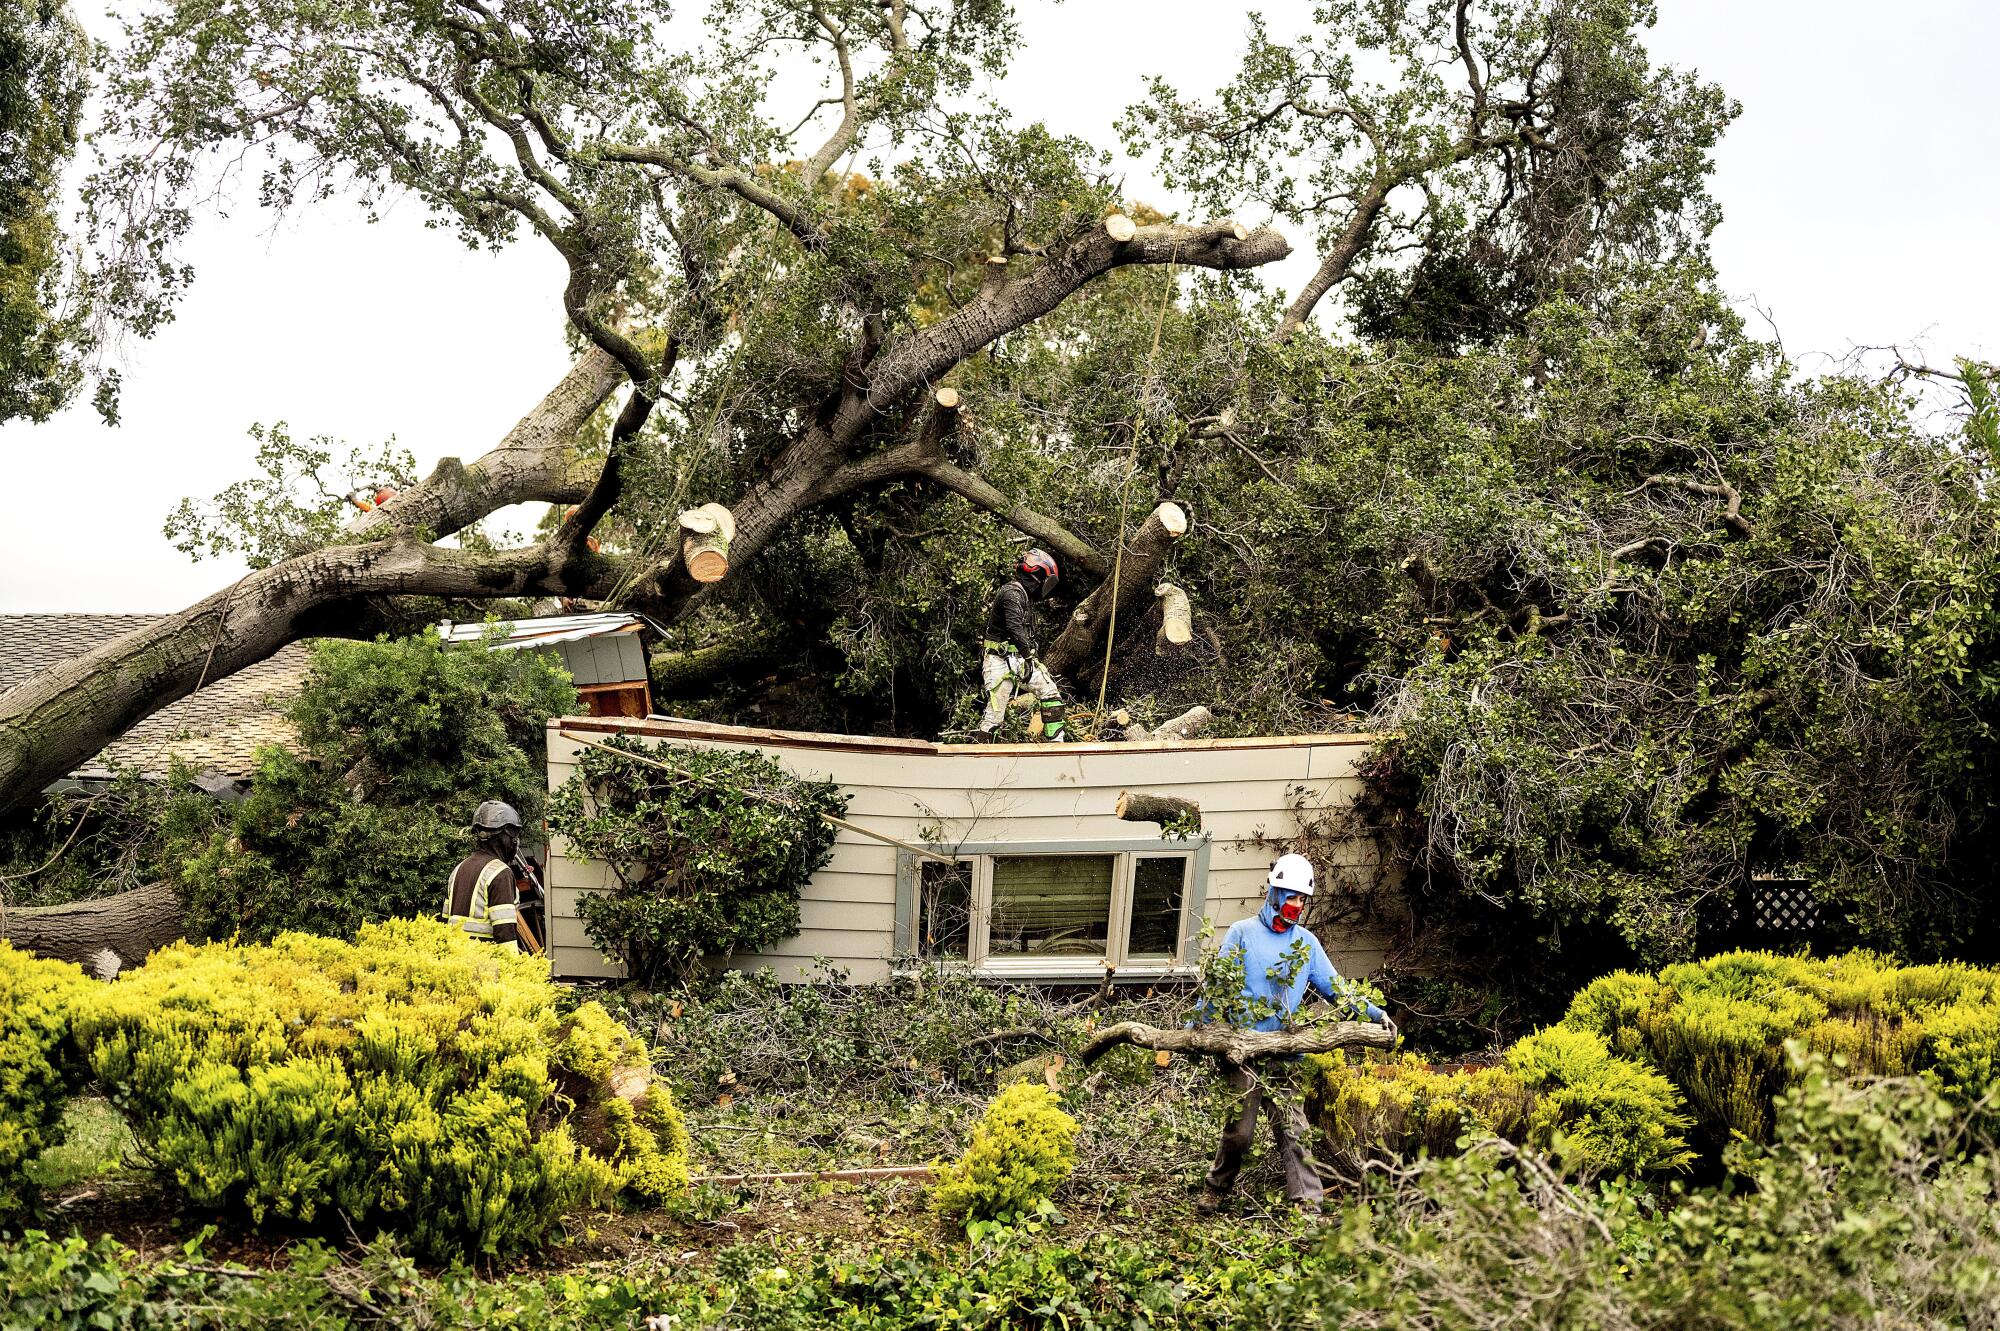 Workers clear a tree that fell onto a home during heavy wind and rain on Sunday in San Jose